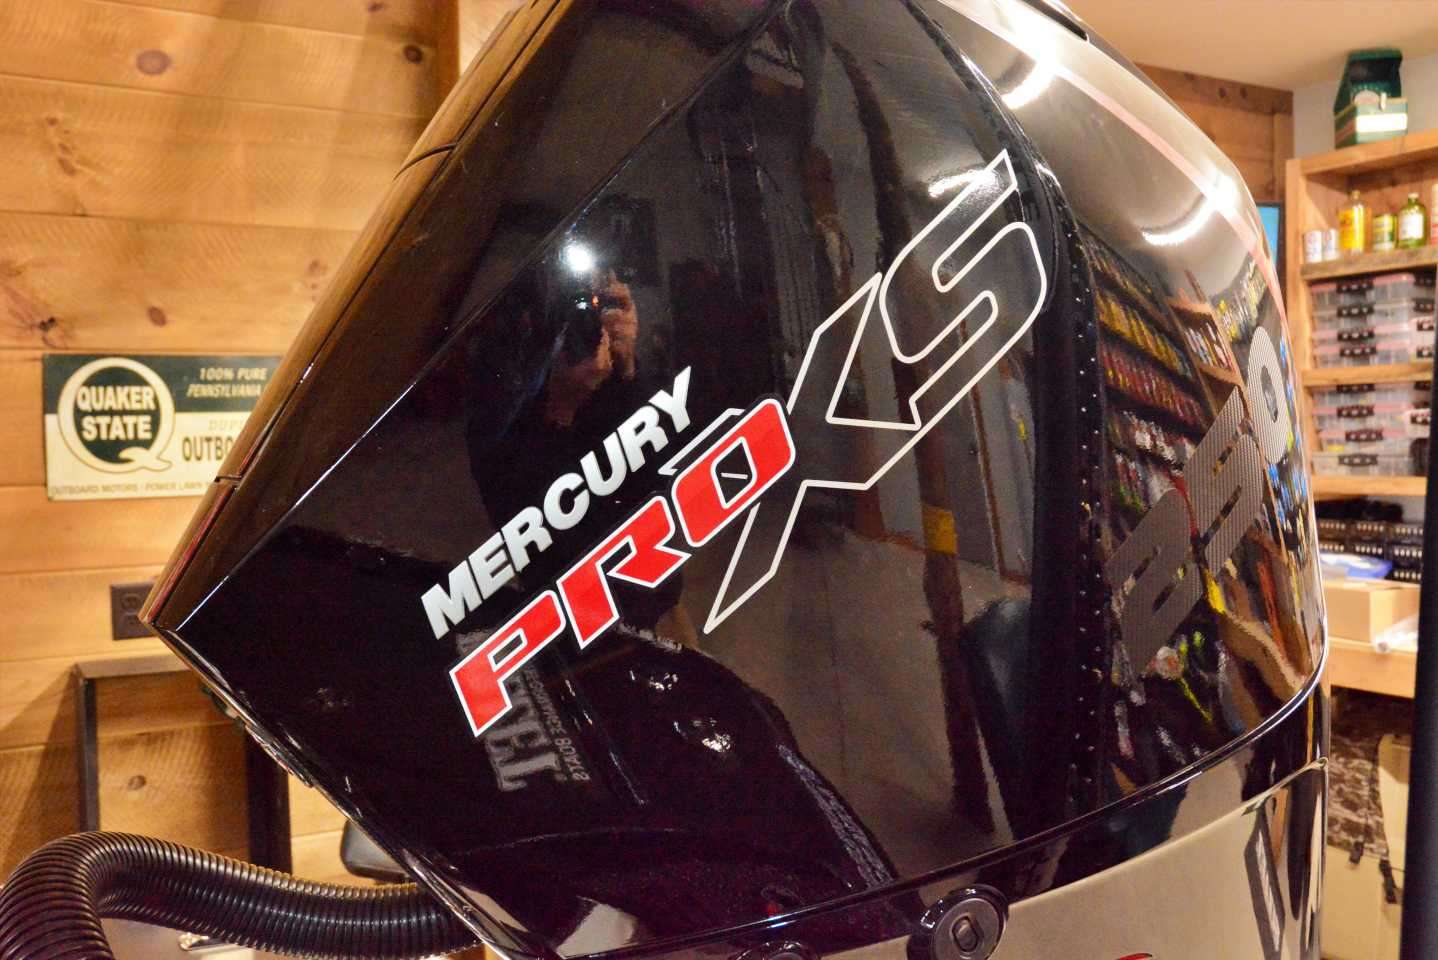 The 250 horsepower Mercury Pro XS is shiny and ready for action.  